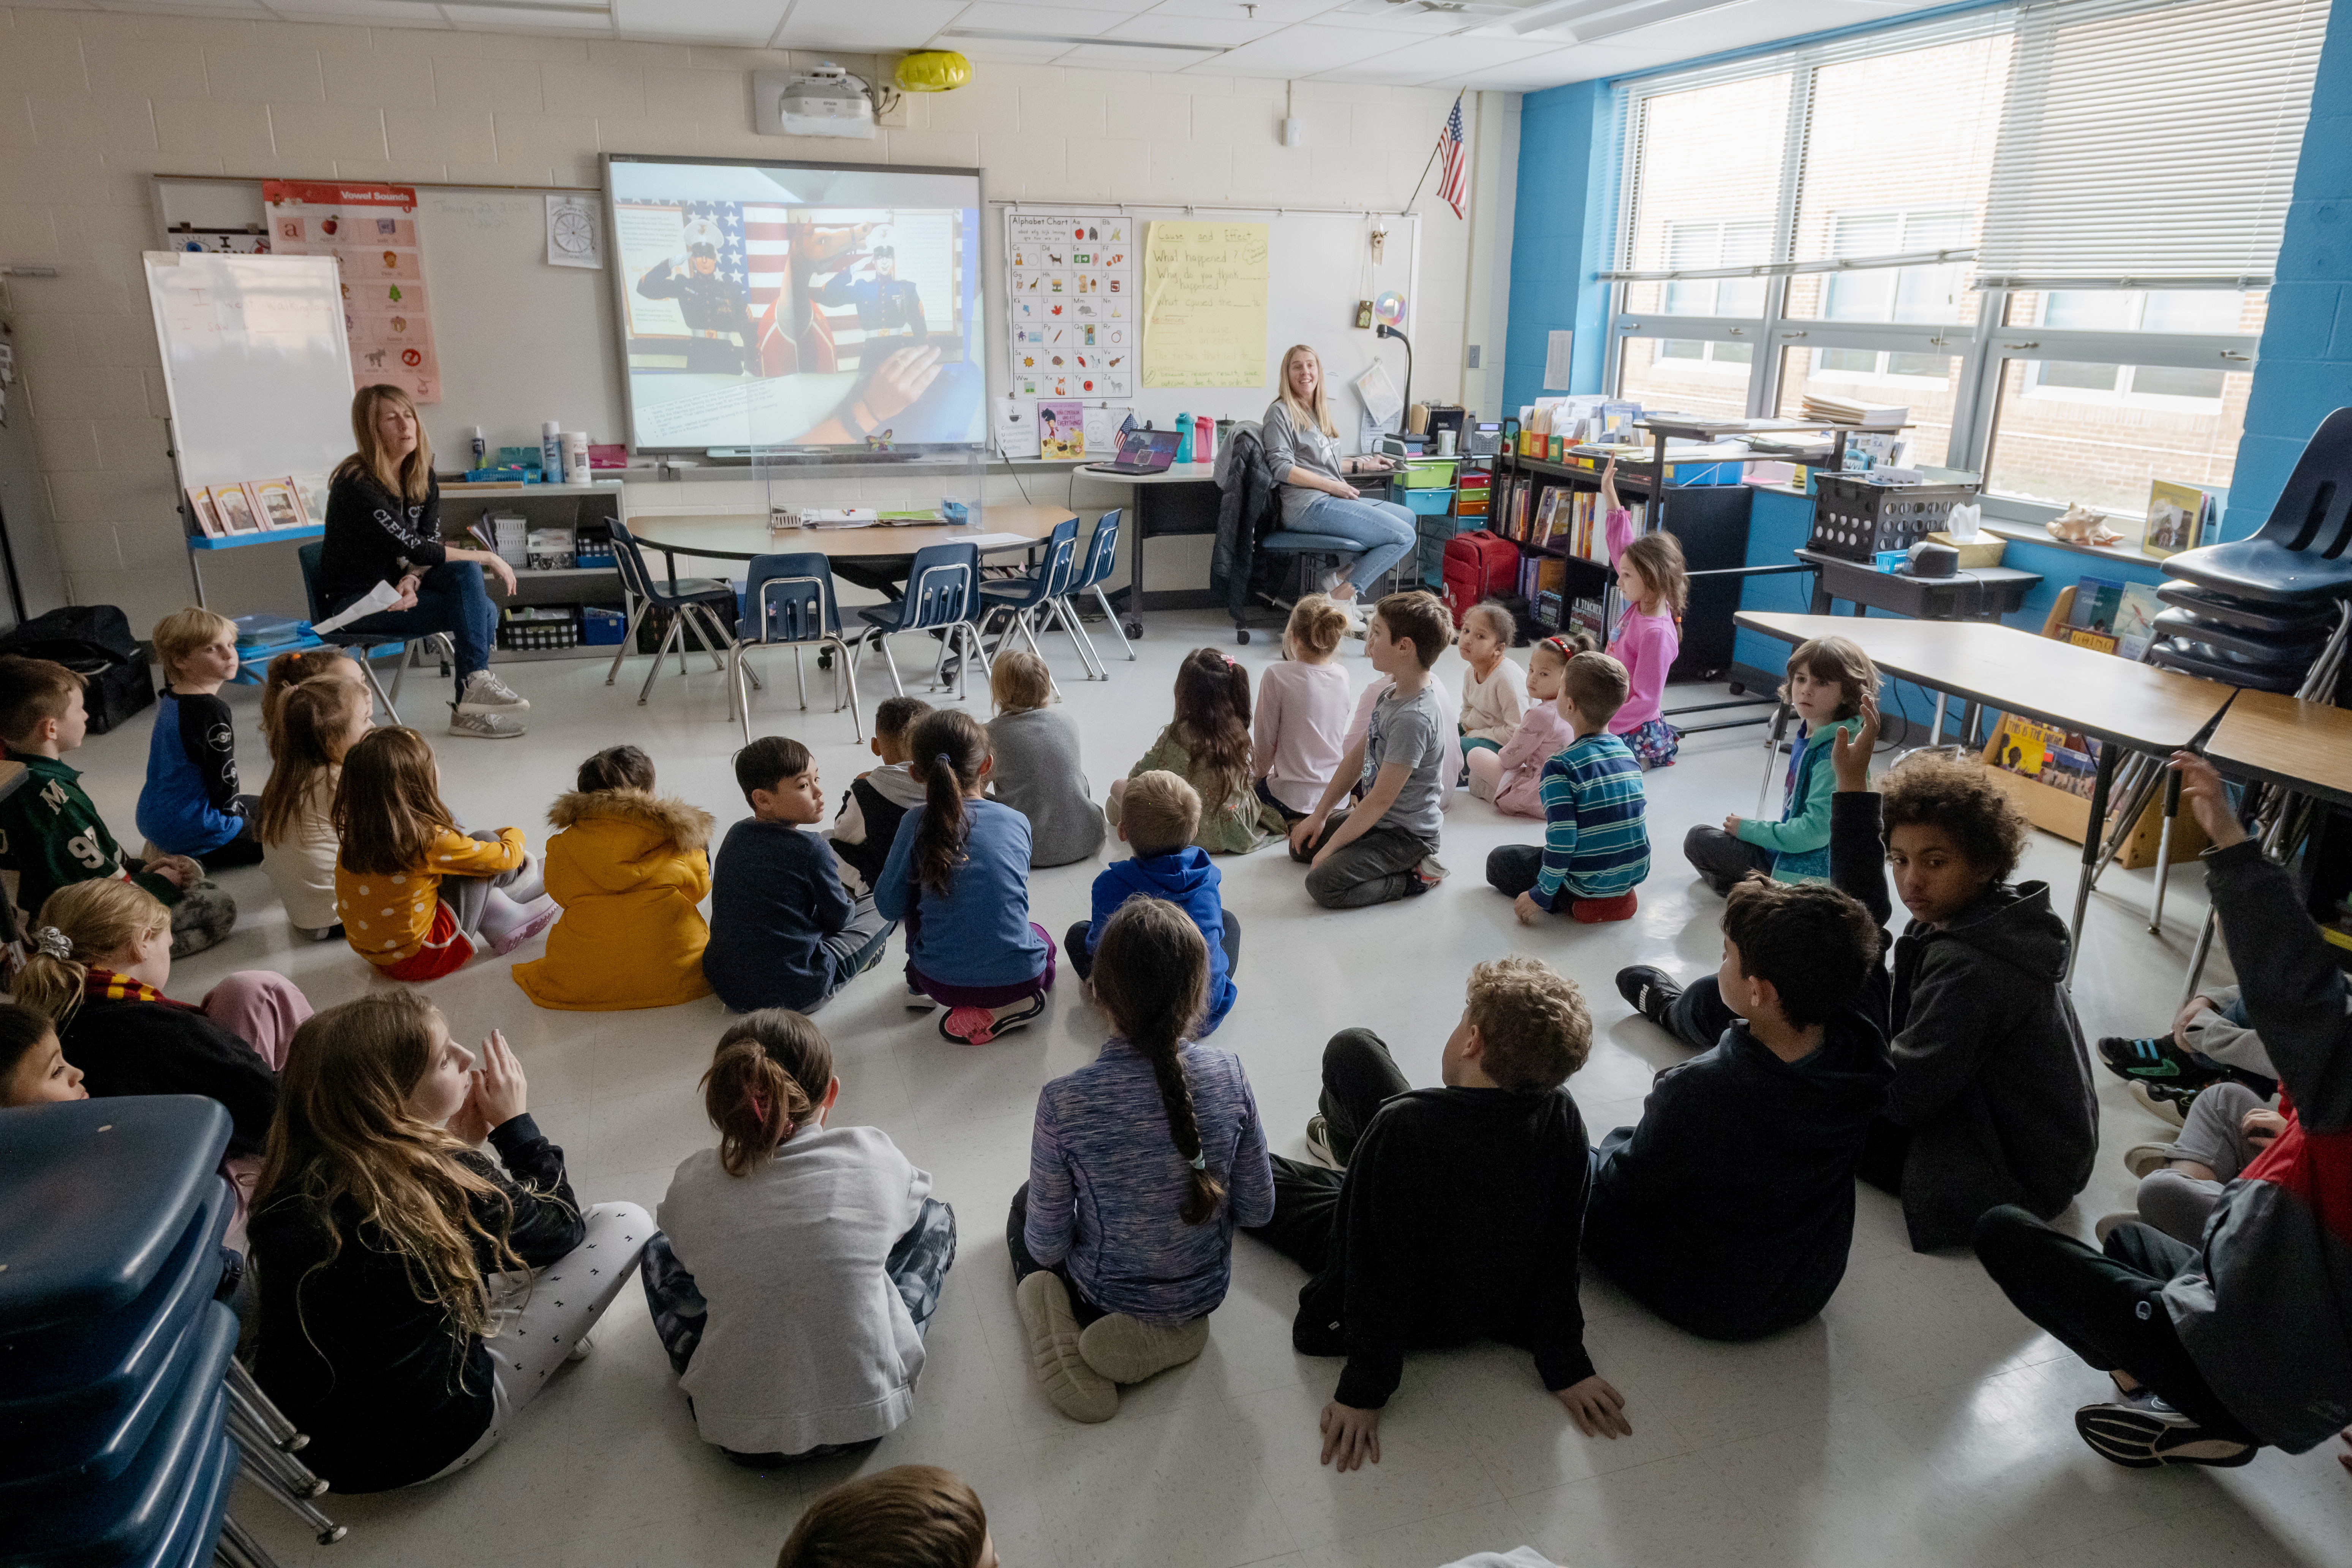 Fifty students at Clermont Elementary gather each month for Military Kids Club meetings to bond over shared experiences, participate in activities that recognize military service and honor the traits of those who serve.